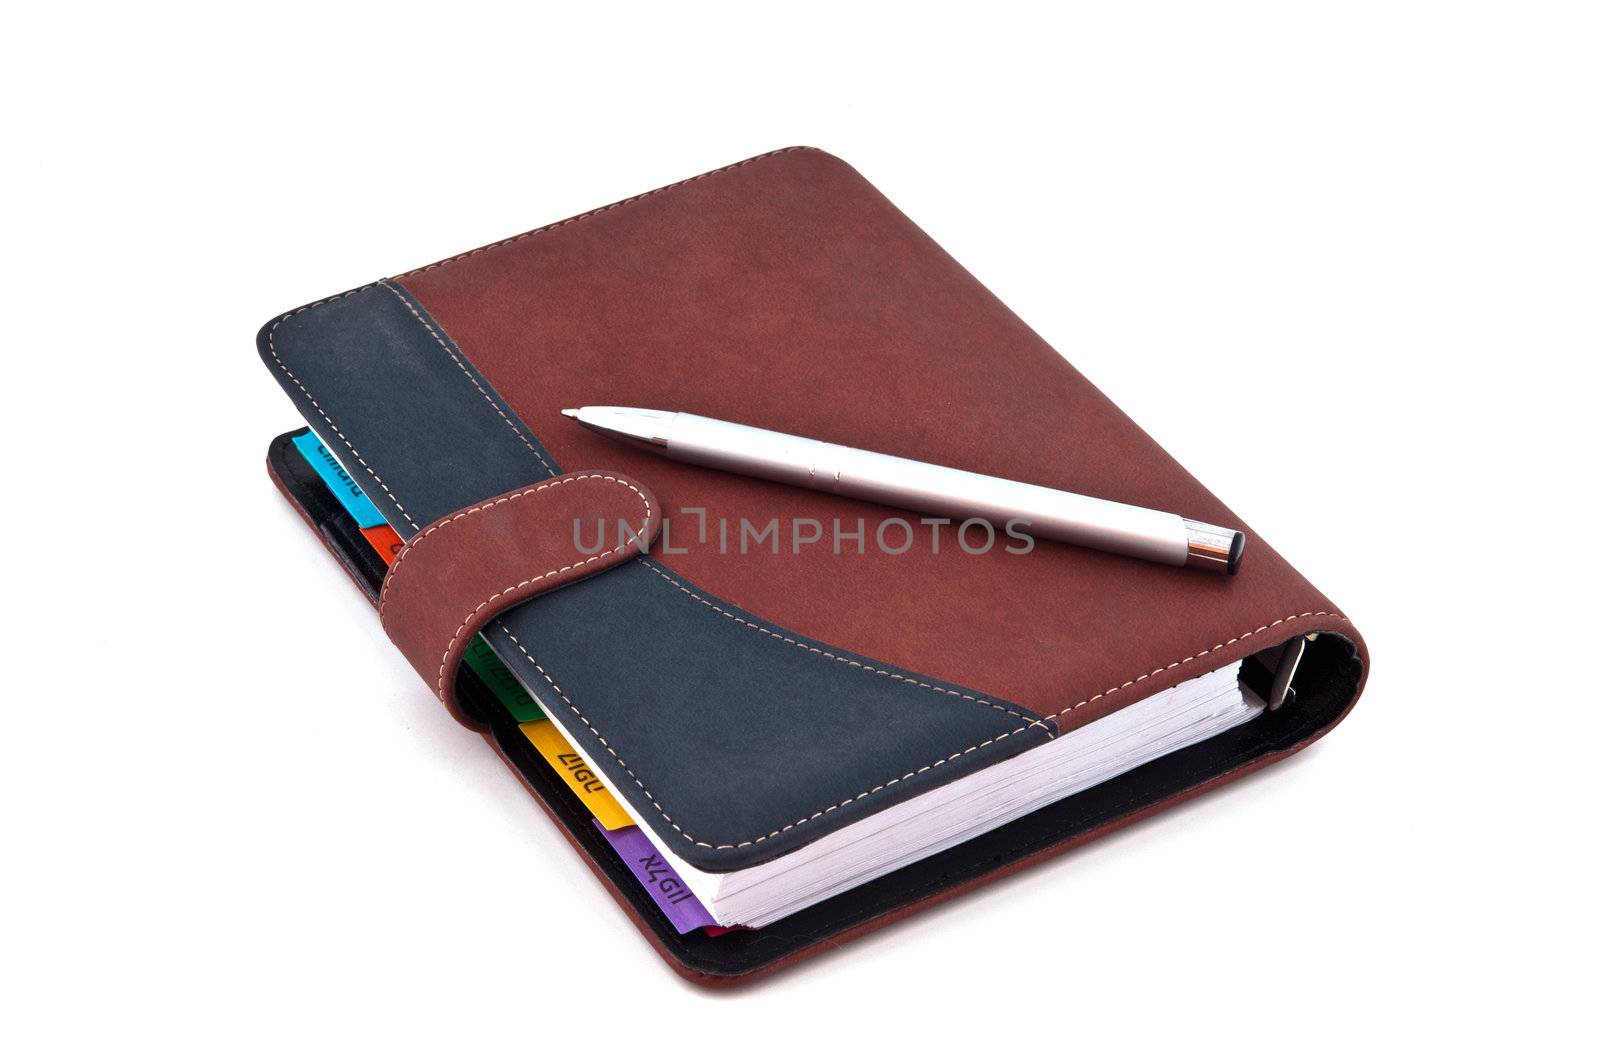 Diary of a brown color with a soft cover, photographed against a white background